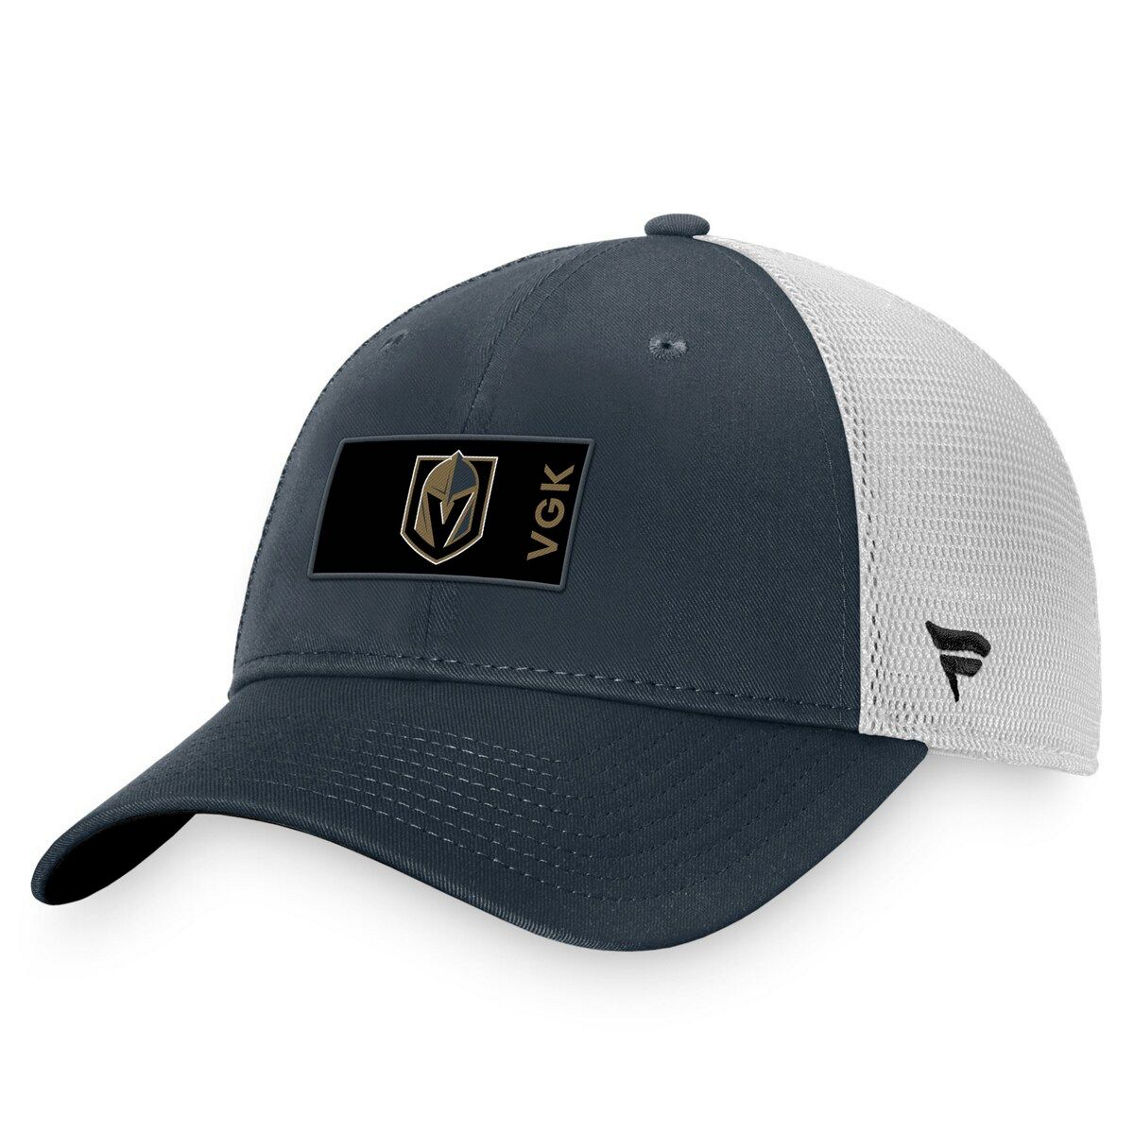 Fanatics Branded Men's Charcoal/White Vegas Golden Knights Authentic Pro Rink Trucker Snapback Hat - Image 2 of 4